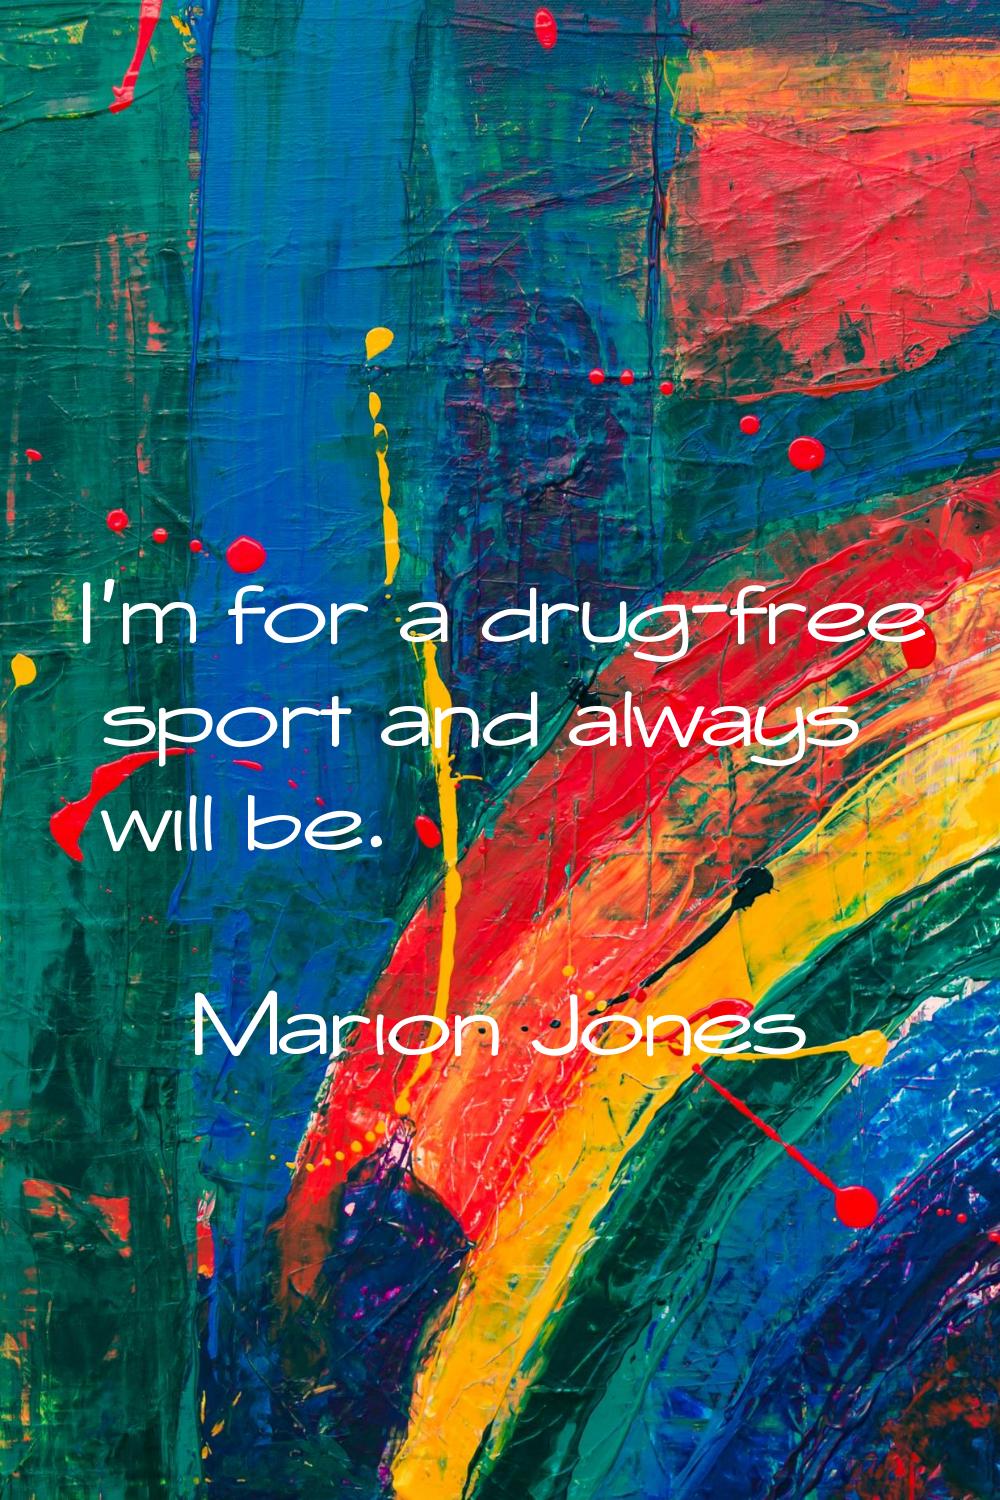 I'm for a drug-free sport and always will be.